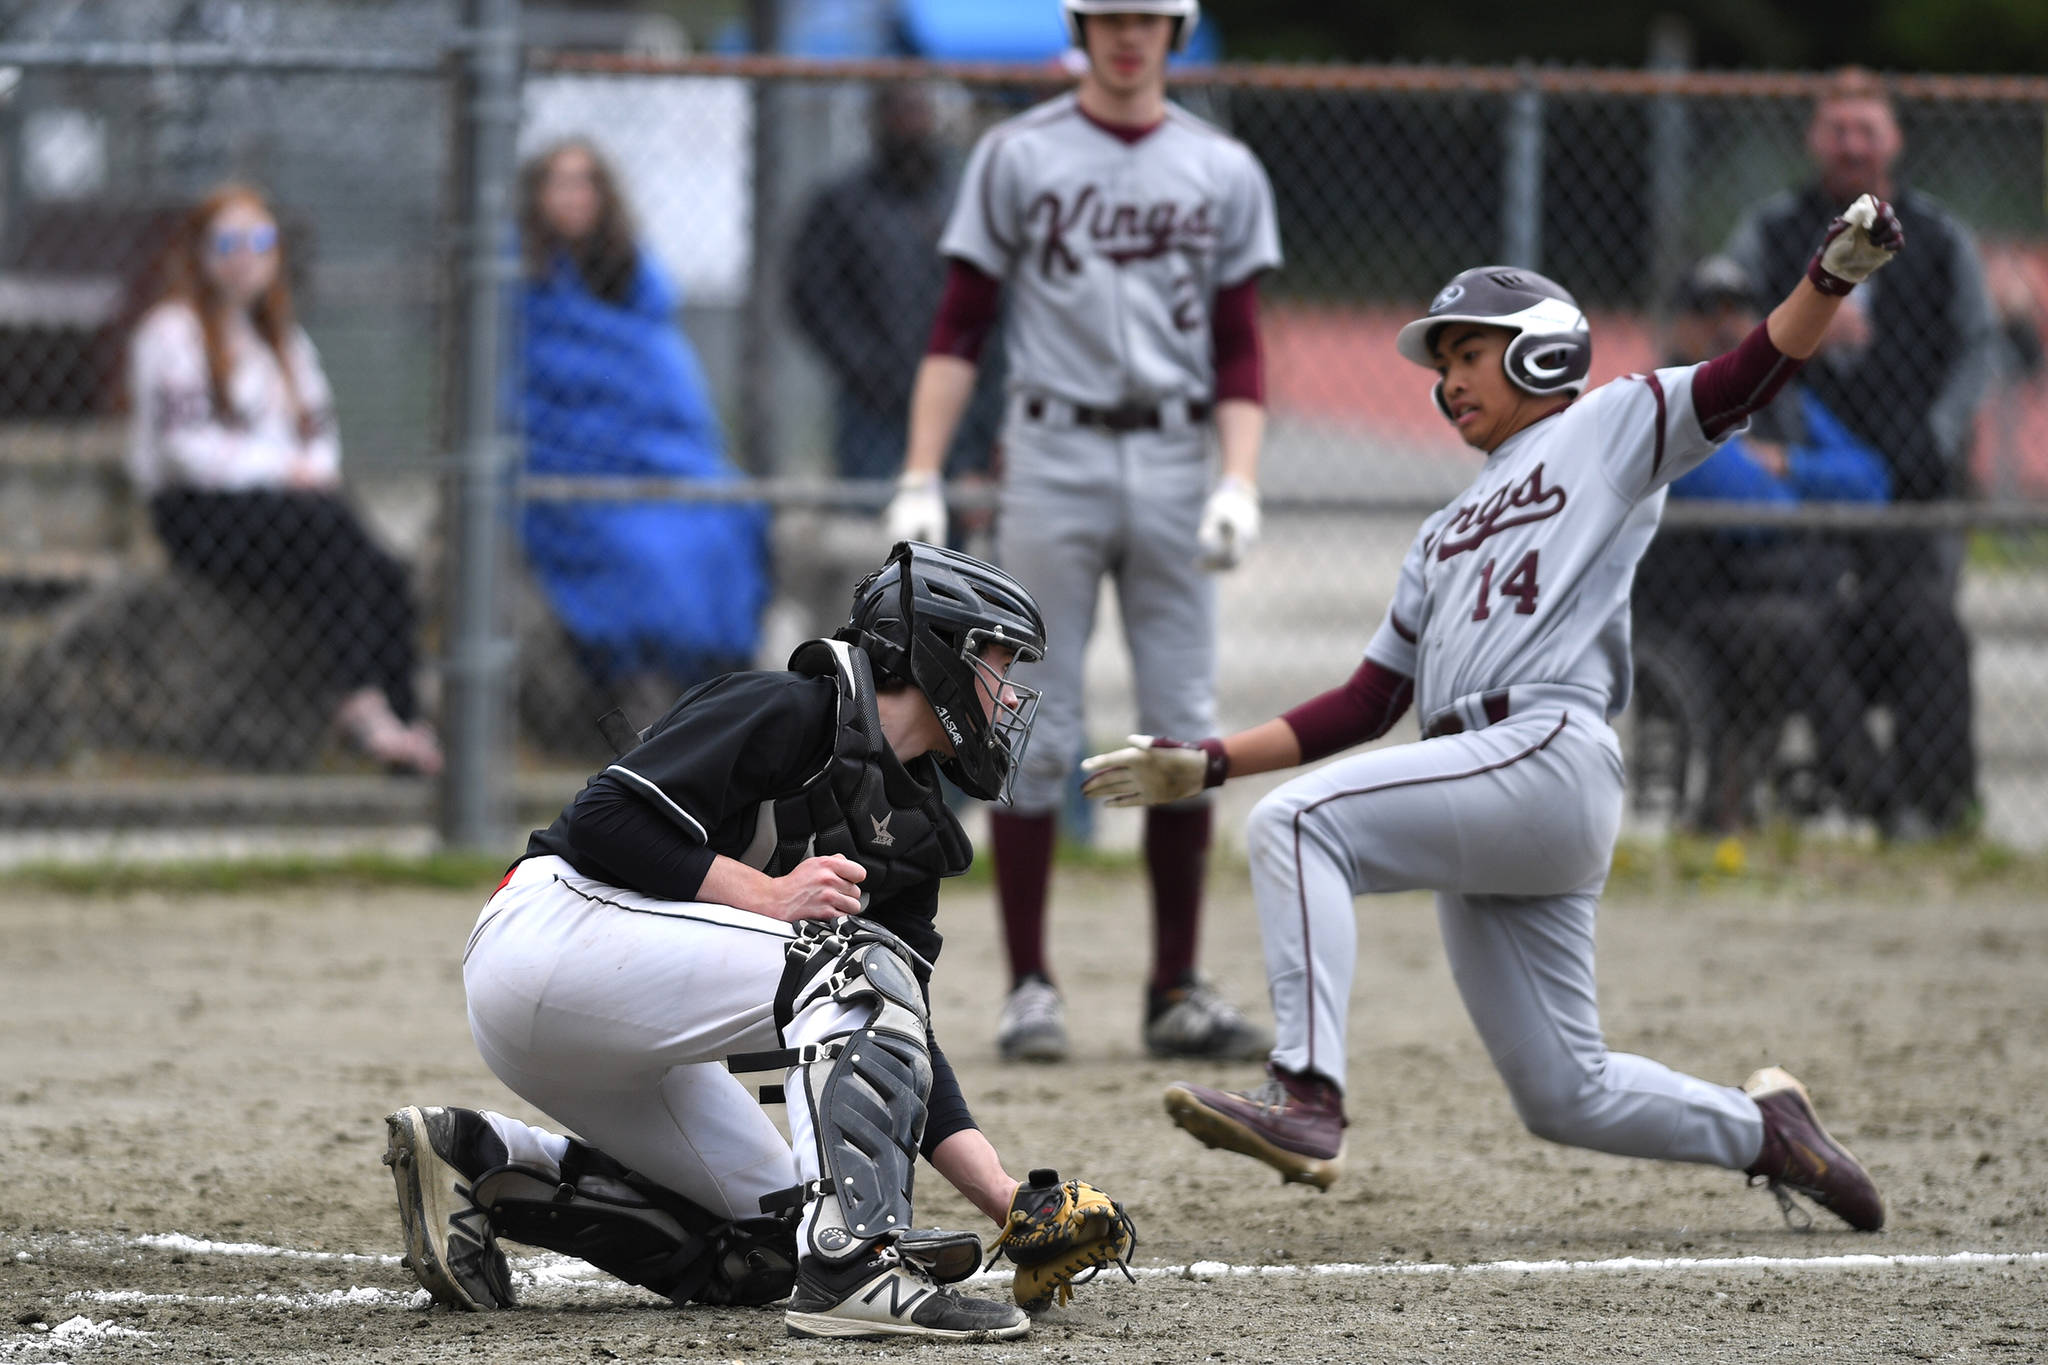 Ketchikan’s CJ Paula is tagged out at home by Juneau-Douglas’ Brock McCormick during the Region V Baseball Championship at Adair-Kennedy Memorial Park on Friday, May 24, 2019. (Michael Penn | Juneau Empire)